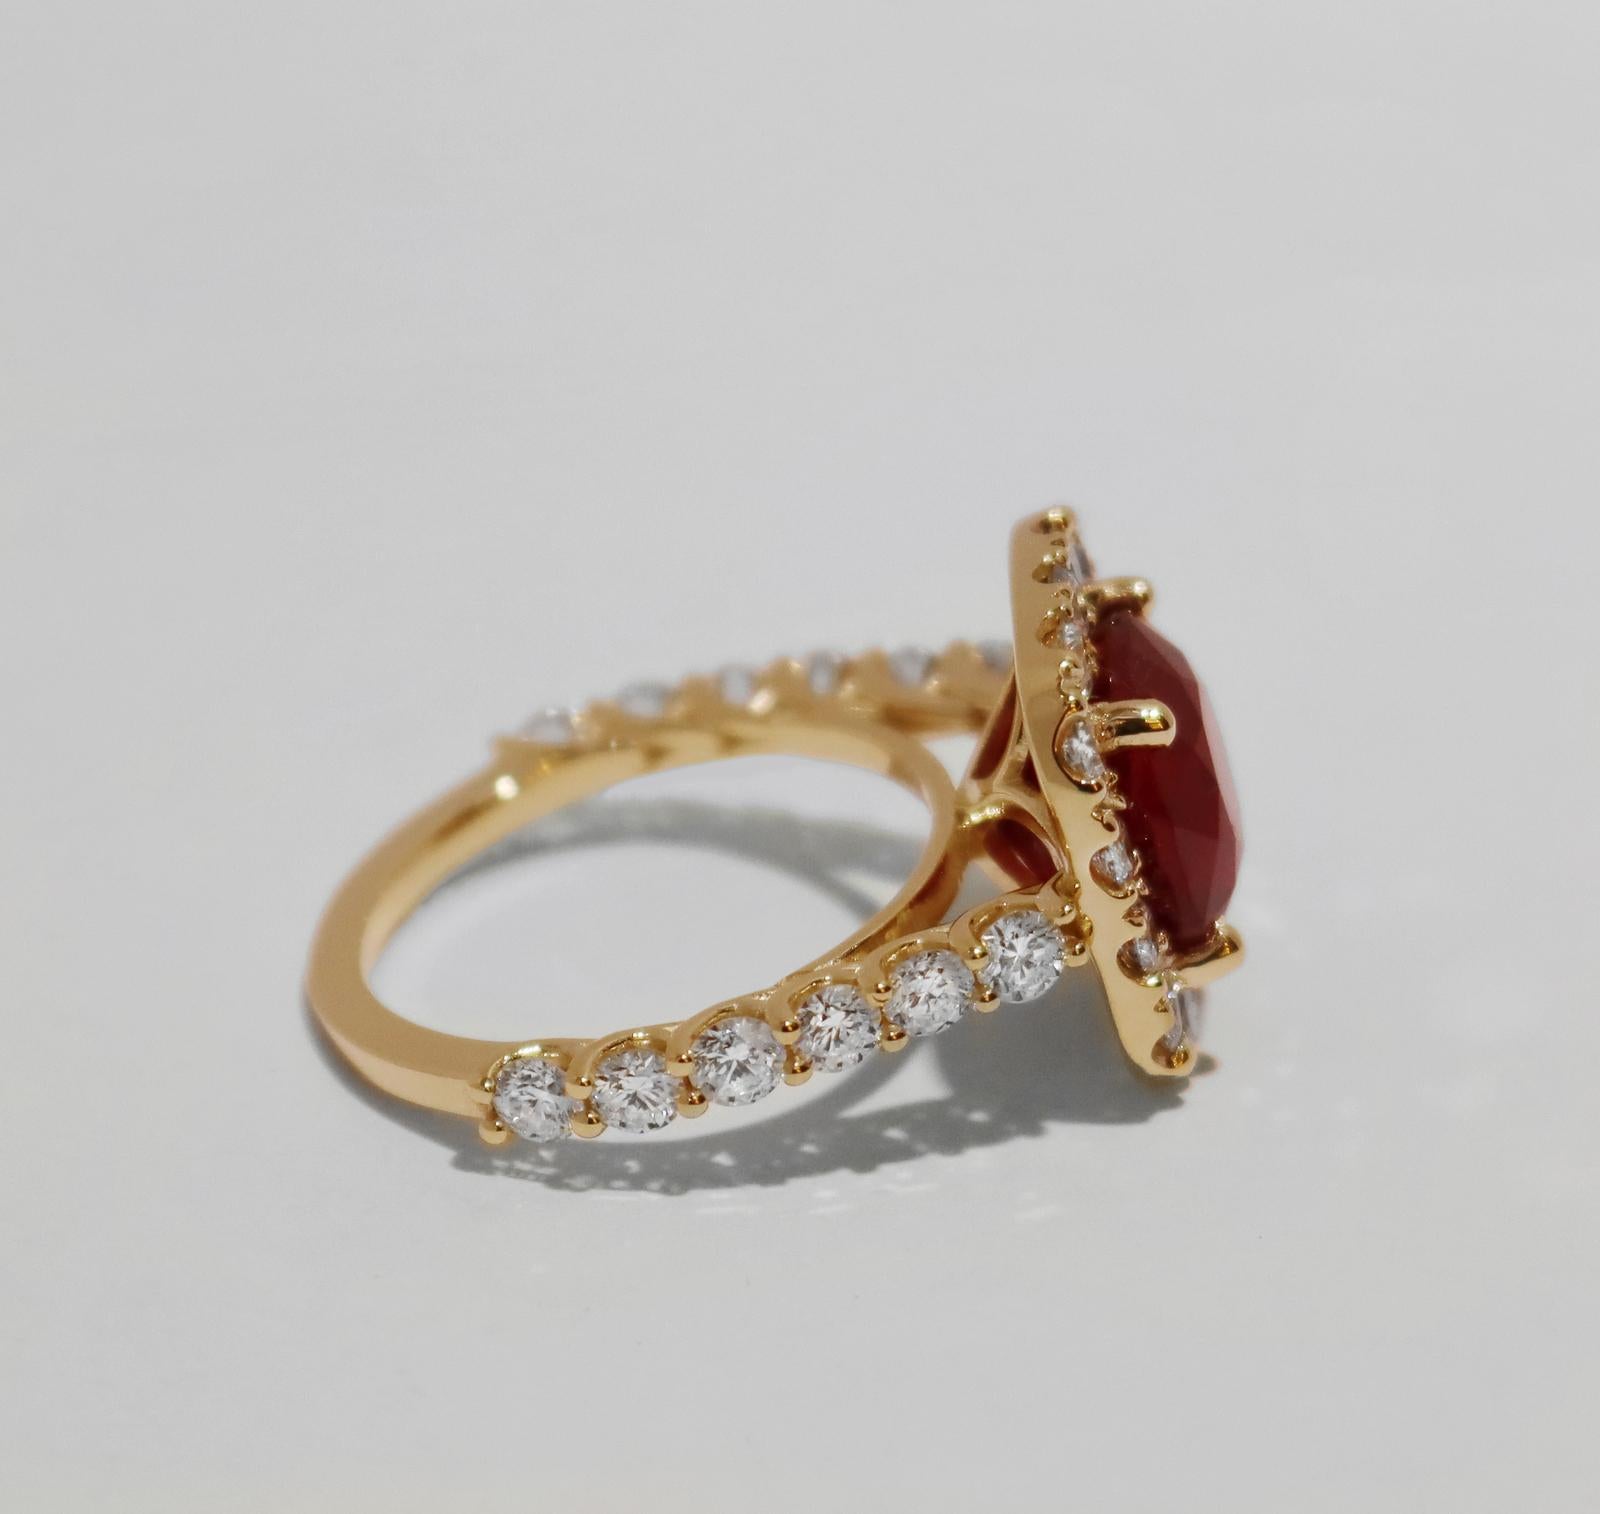 RED RUBY RING WITH DIAMONDS IN YELLOW GOLD 

14k yellow gold
Ring size: 8
Sapphire: 5.45ct, 10x10mm
Diamonds: 2.3ct, VS clarity, E-F color

Retail: $7,500